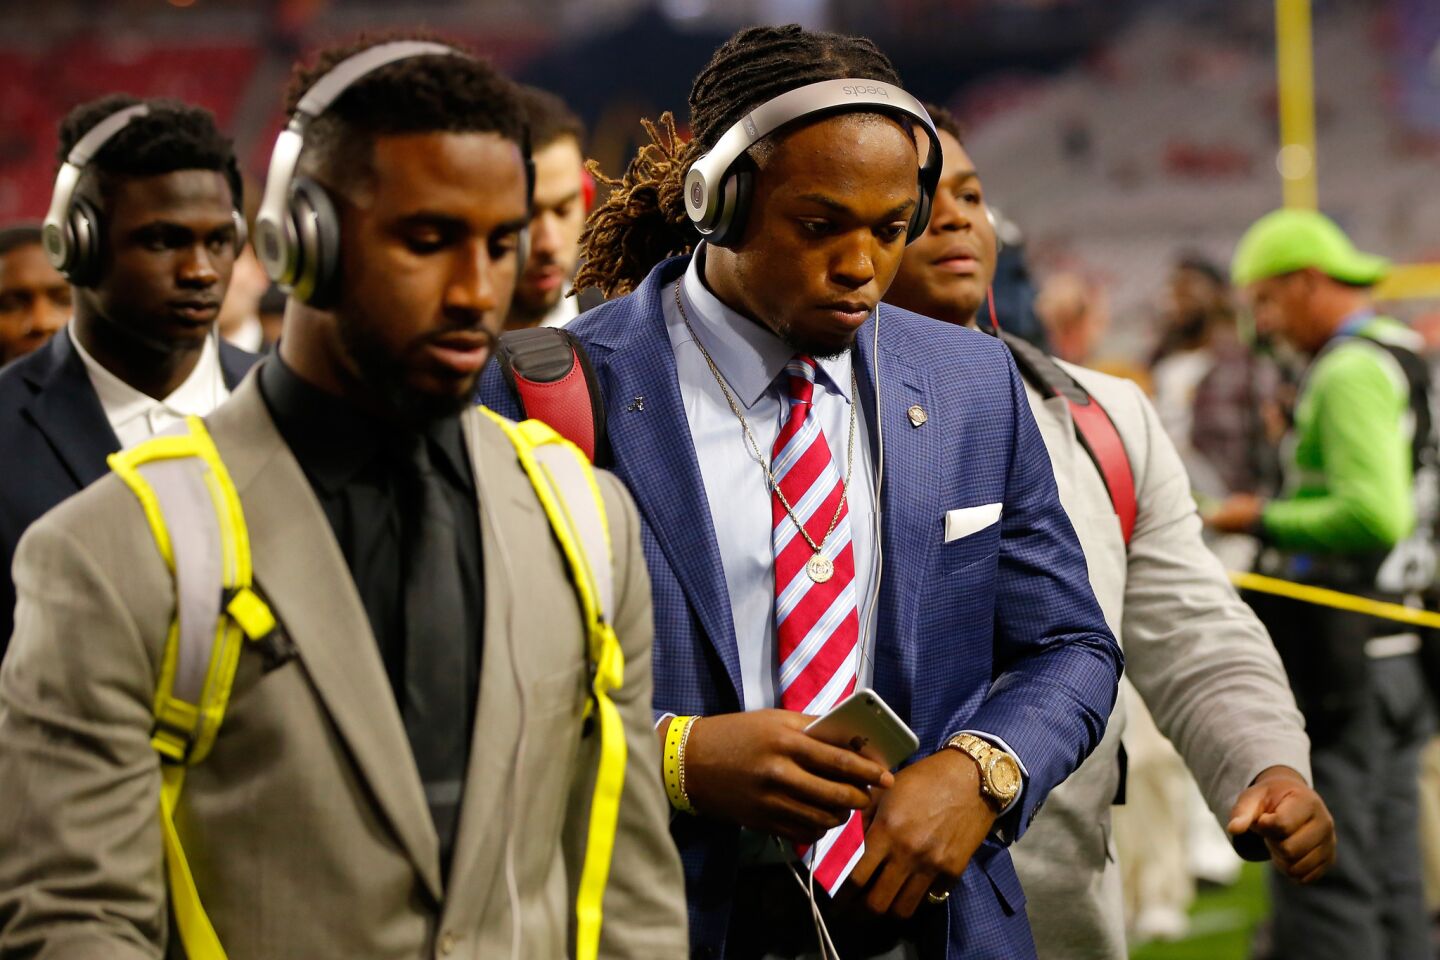 Alabama running back and Heisman Trophy winner Derrick Henry, right, walks on to the field before the start of the 2016 College Football Playoff championship game against Clemson.